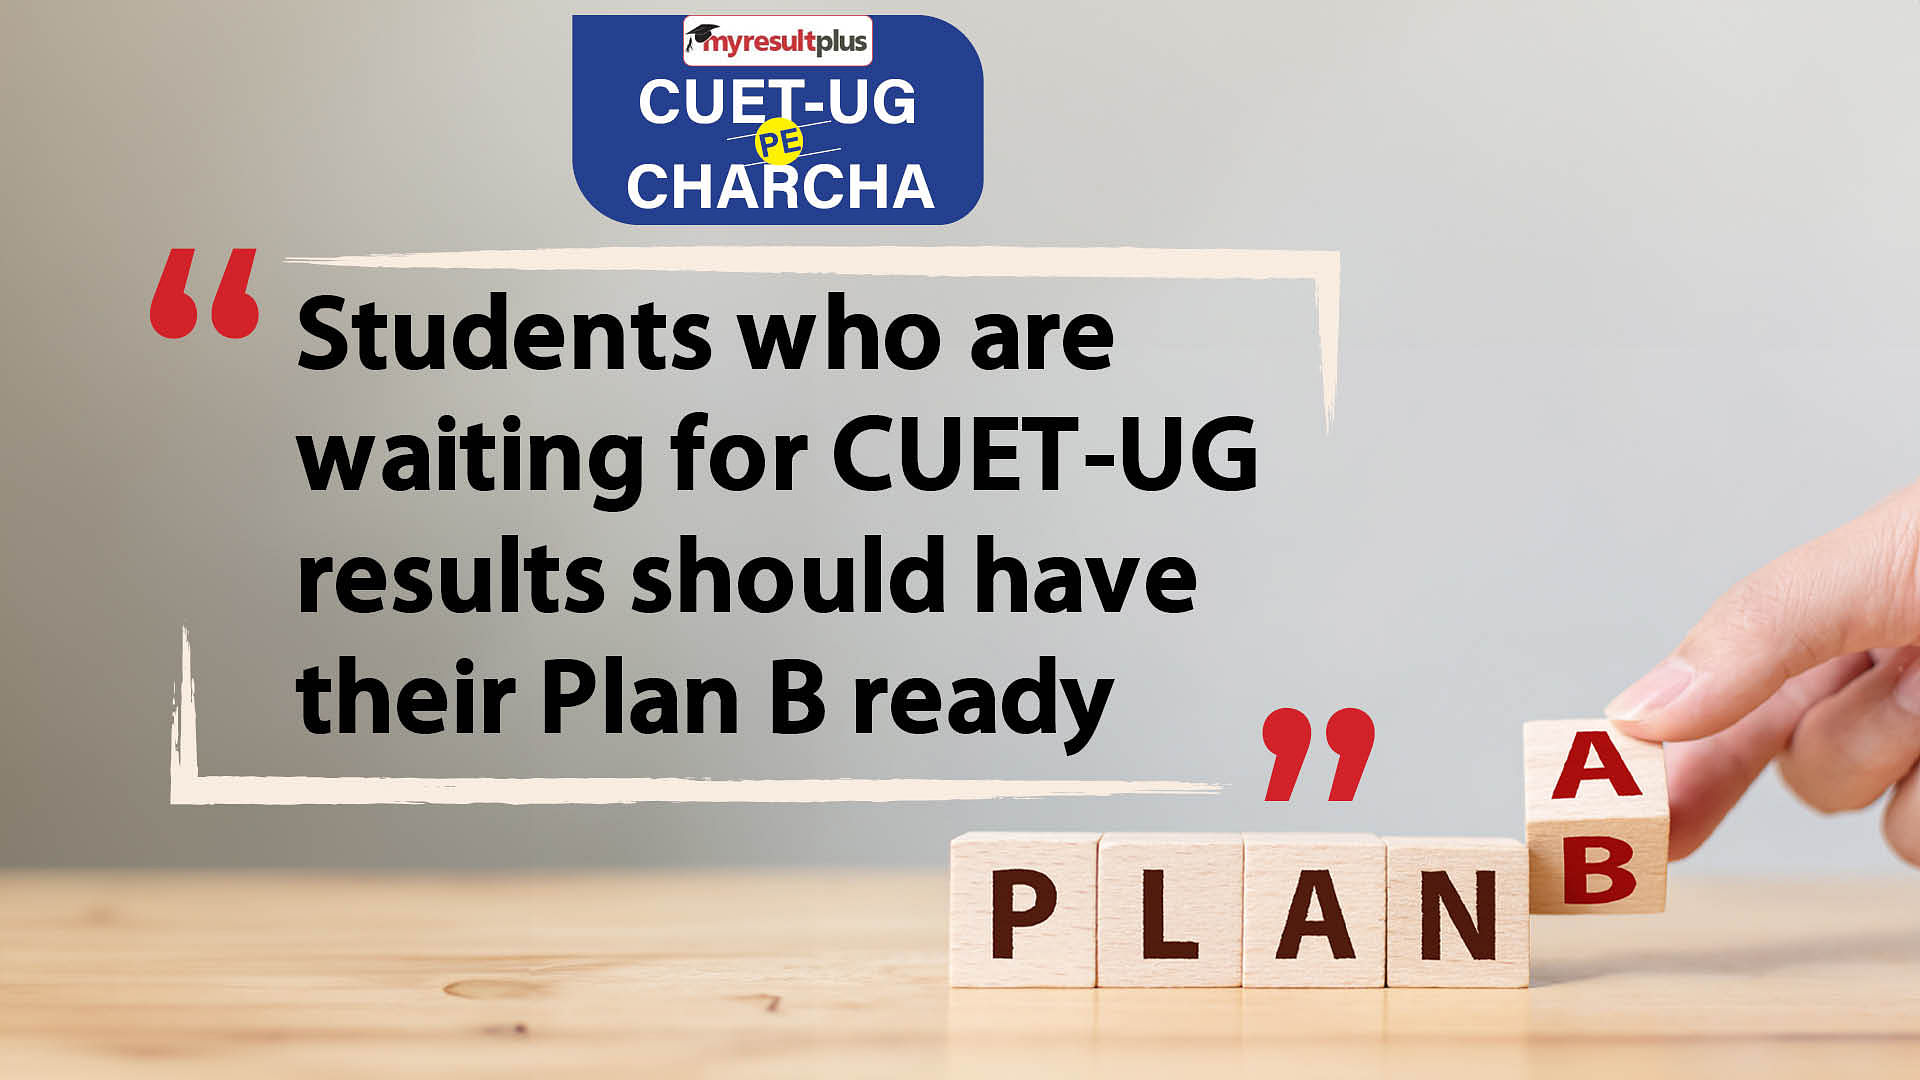 ‘Students who are waiting for CUET UG results should have their Plan B ready’